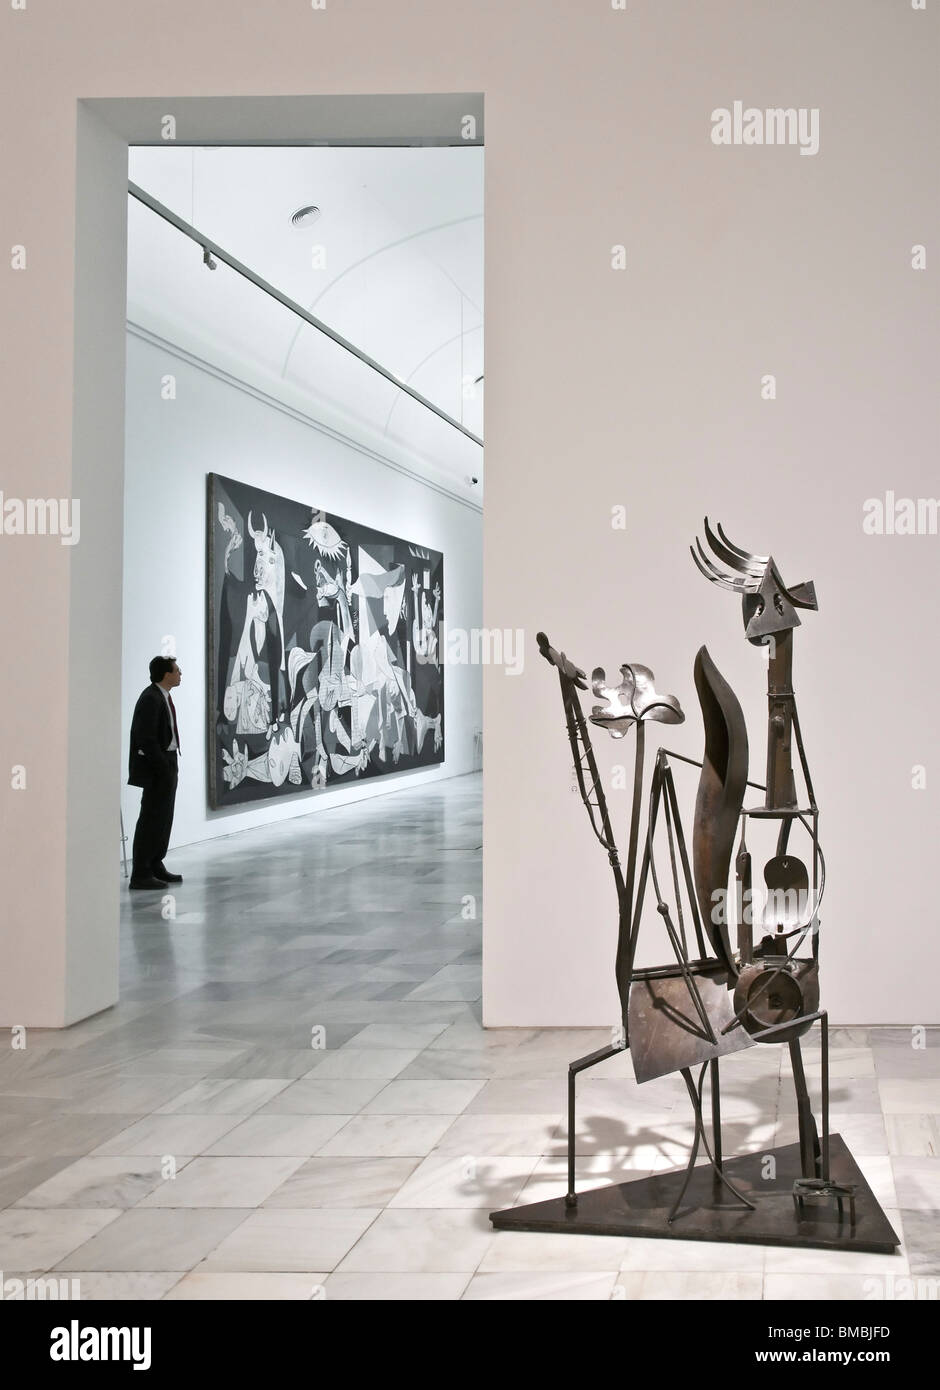 Works by Pablo Picasso, the sculpture 'woman in the garden' and 'Guernica'. in the Centro de Arte Reina Sofia, Madrid, Spain. Stock Photo